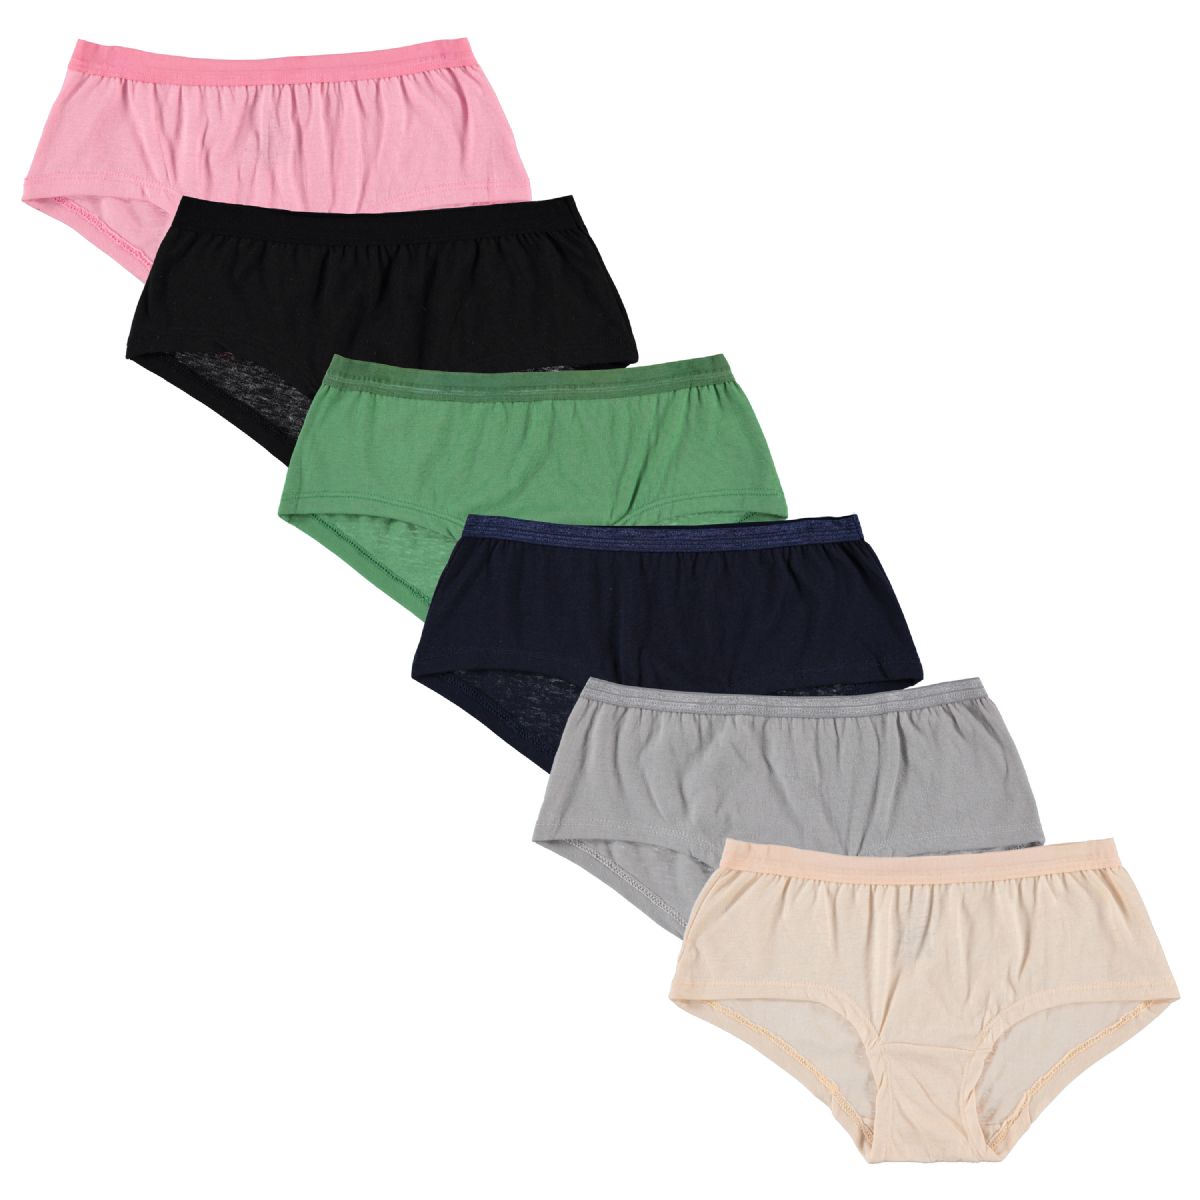 12 Pieces Yacht & Smith Womens Cotton Blend Underwear In Assorted Colors,  Size Small - Womens Panties & Underwear